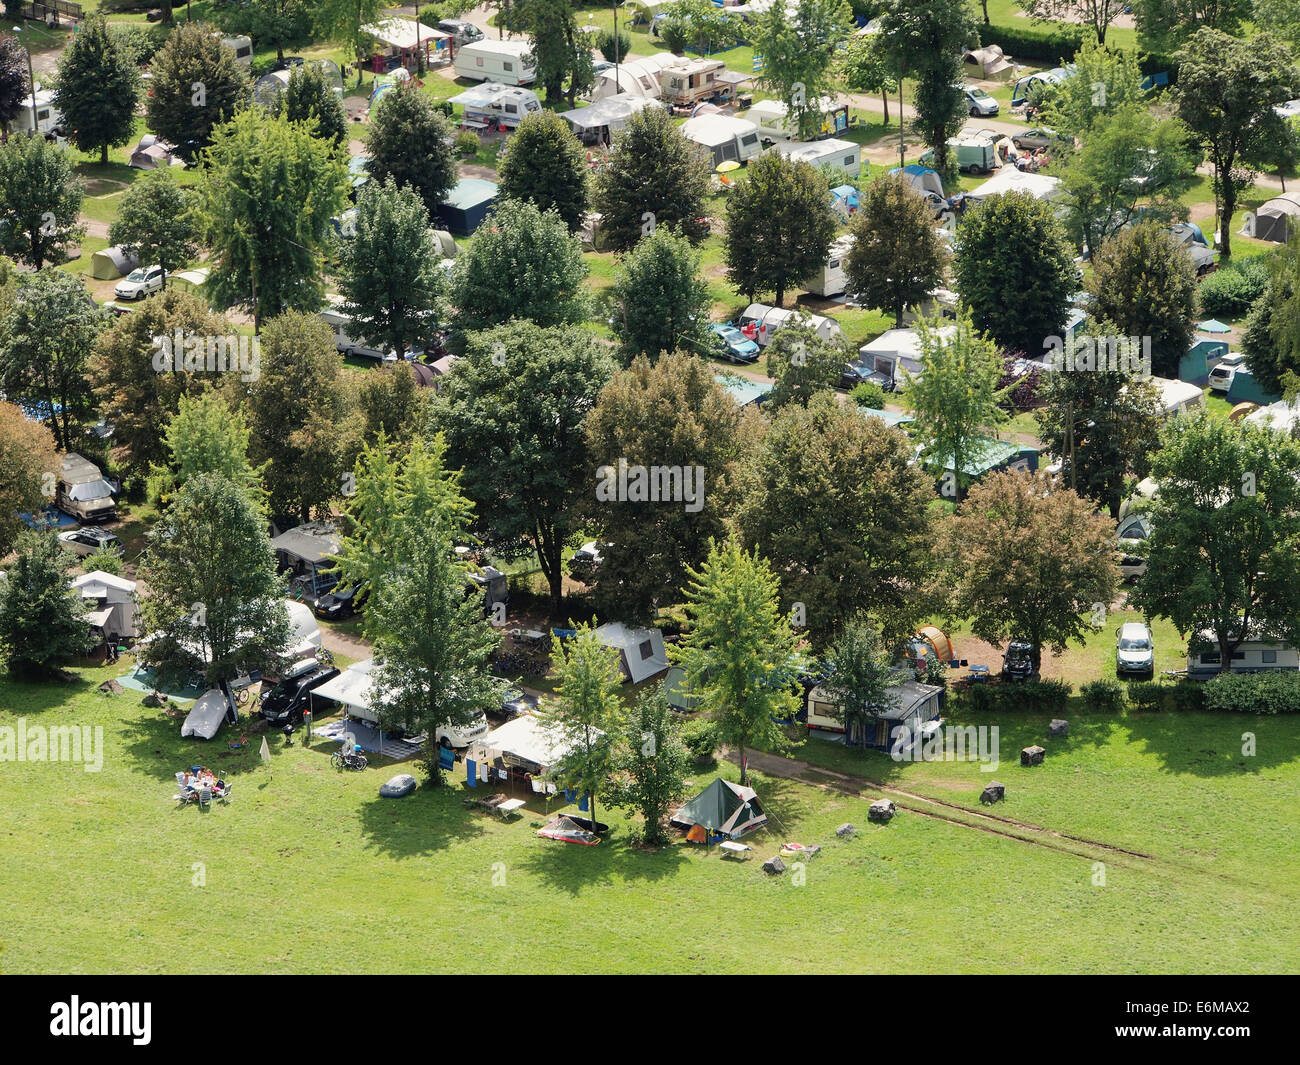 Busy camping site in sunny weather seen from above, Domaine de Chalain, Jura, France Stock Photo